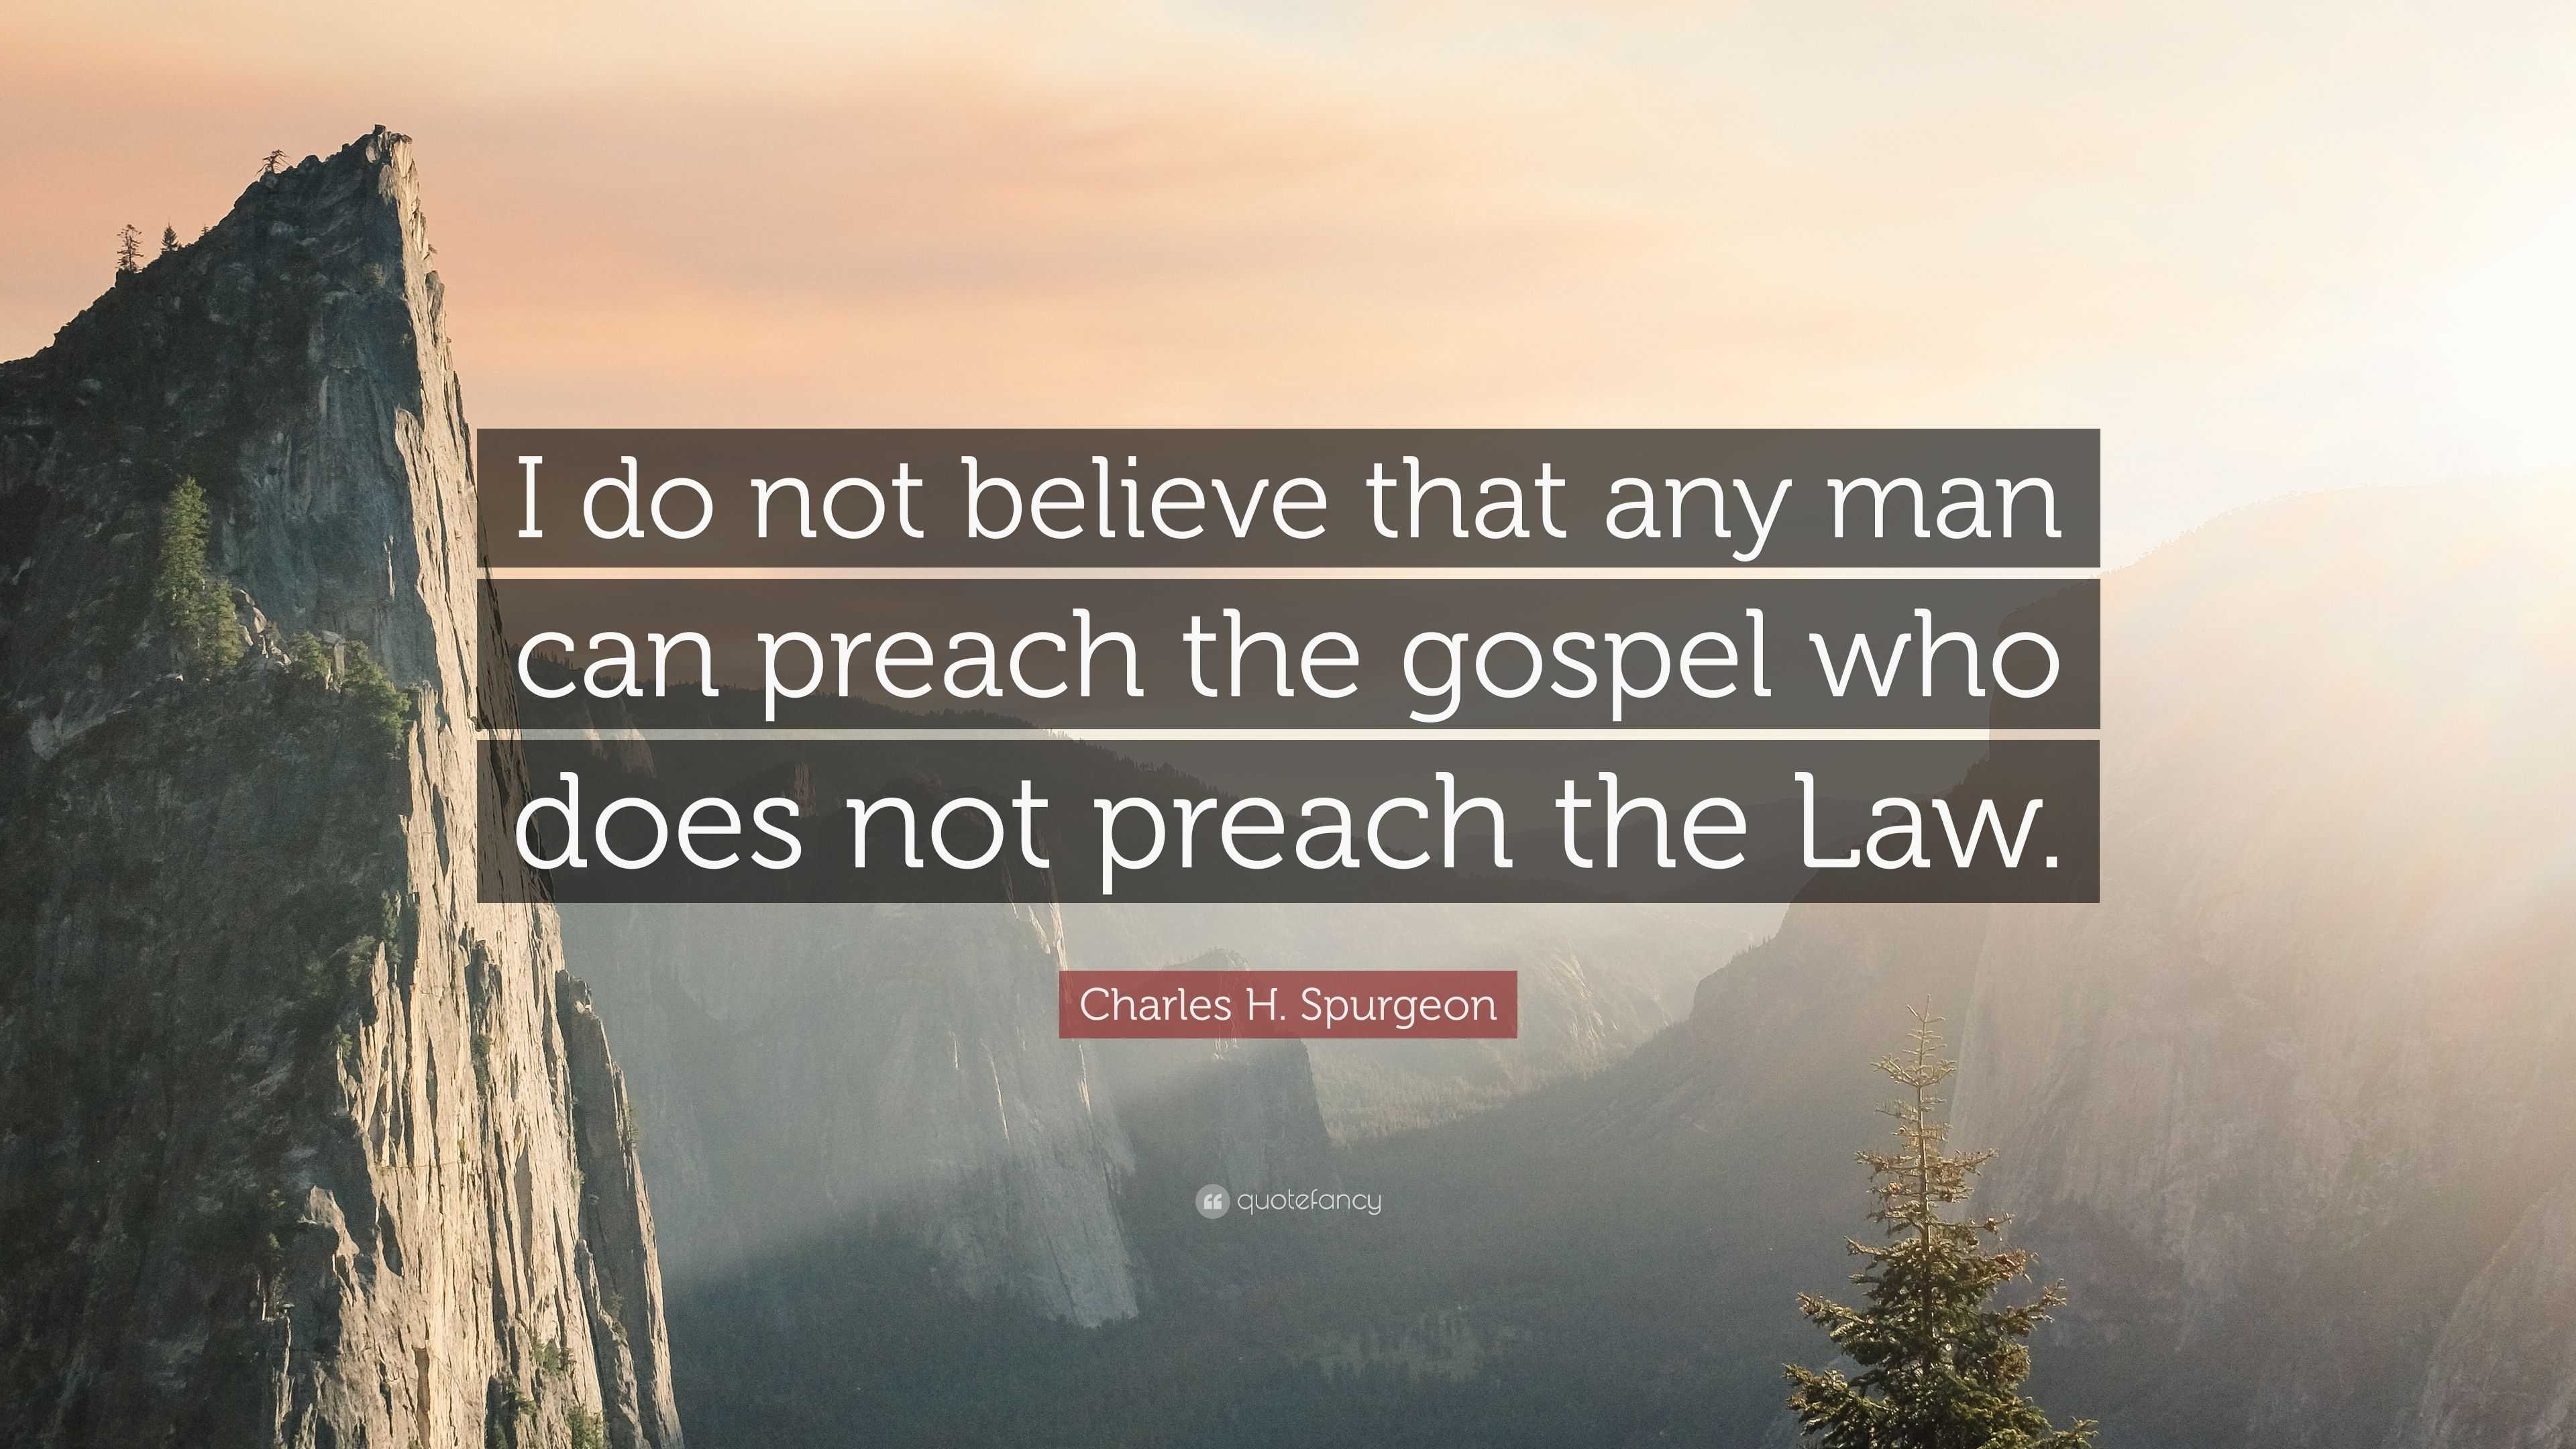 Charles H. Spurgeon Quote: “I do not believe that any man can preach ...